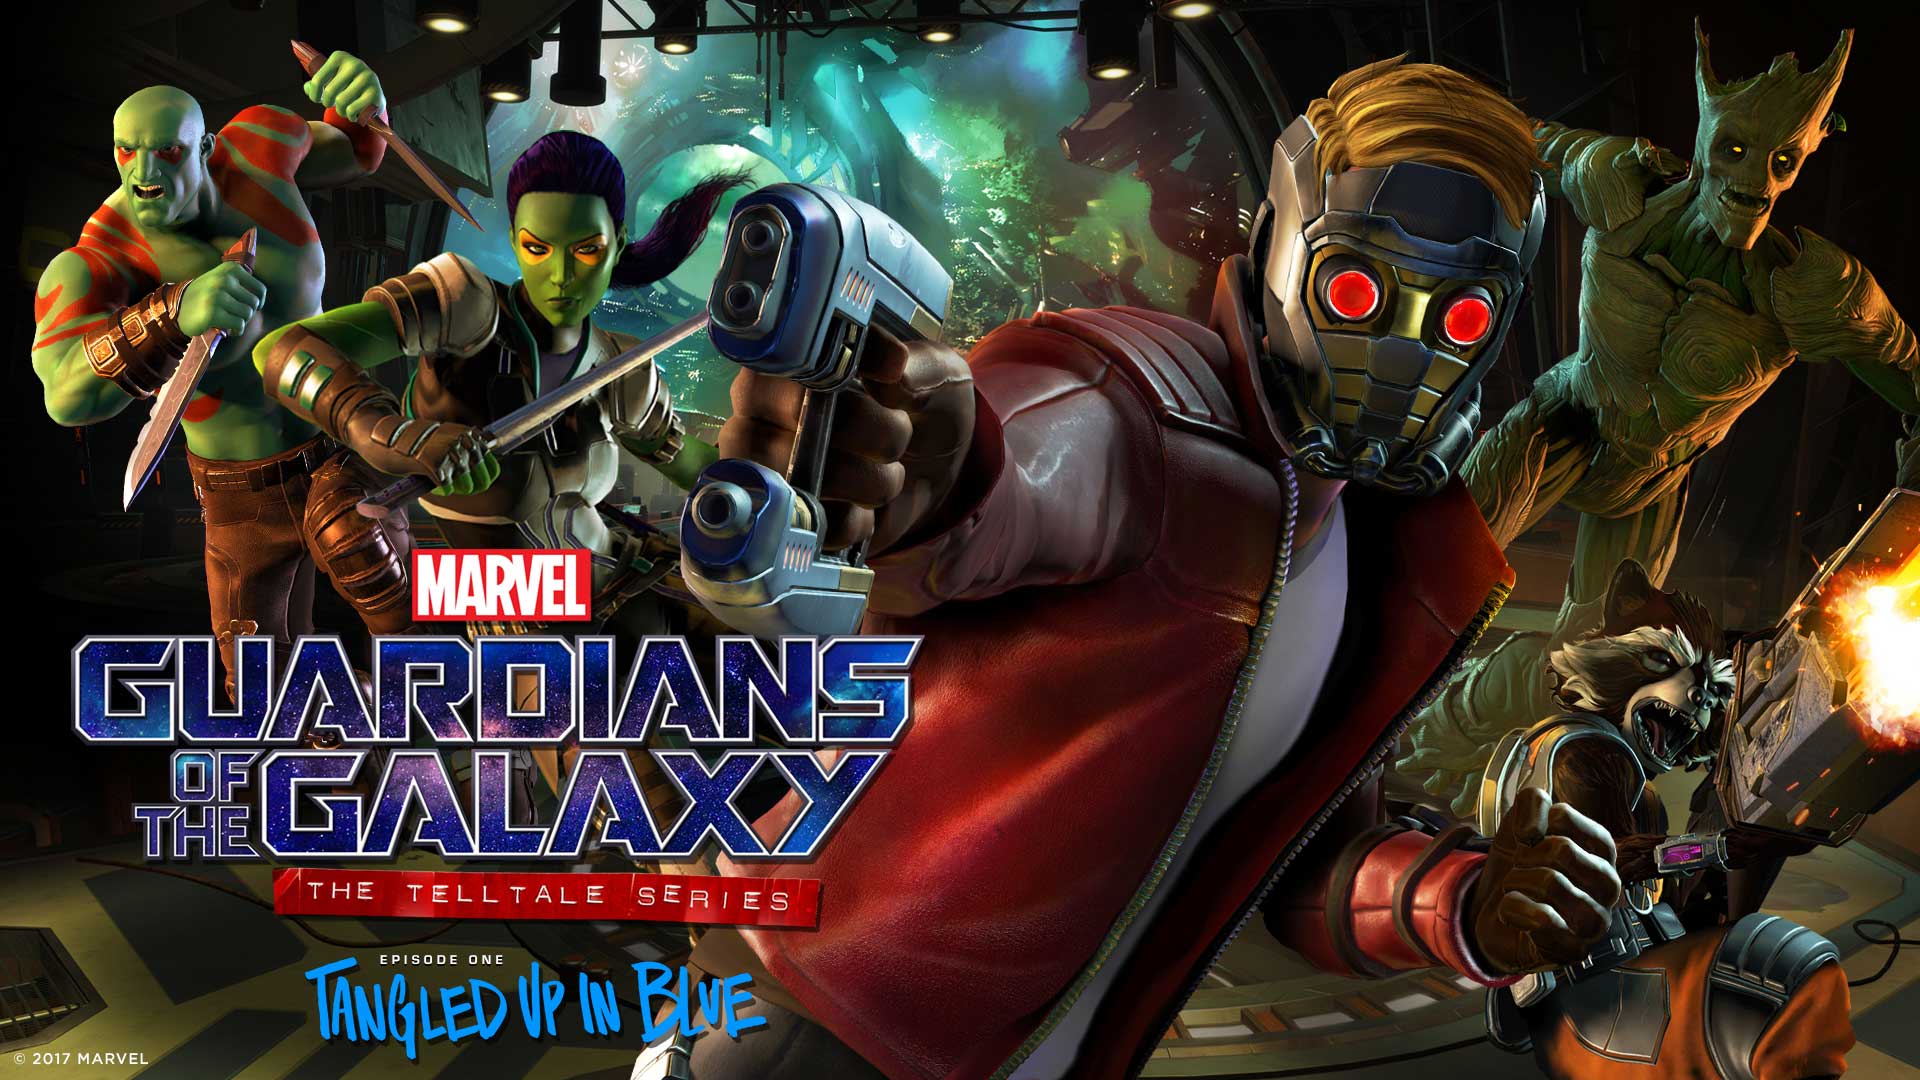 Marvel’s Guardians of the Galaxy: A TellTale Series Episode 1: Tangled Up in Blue Review